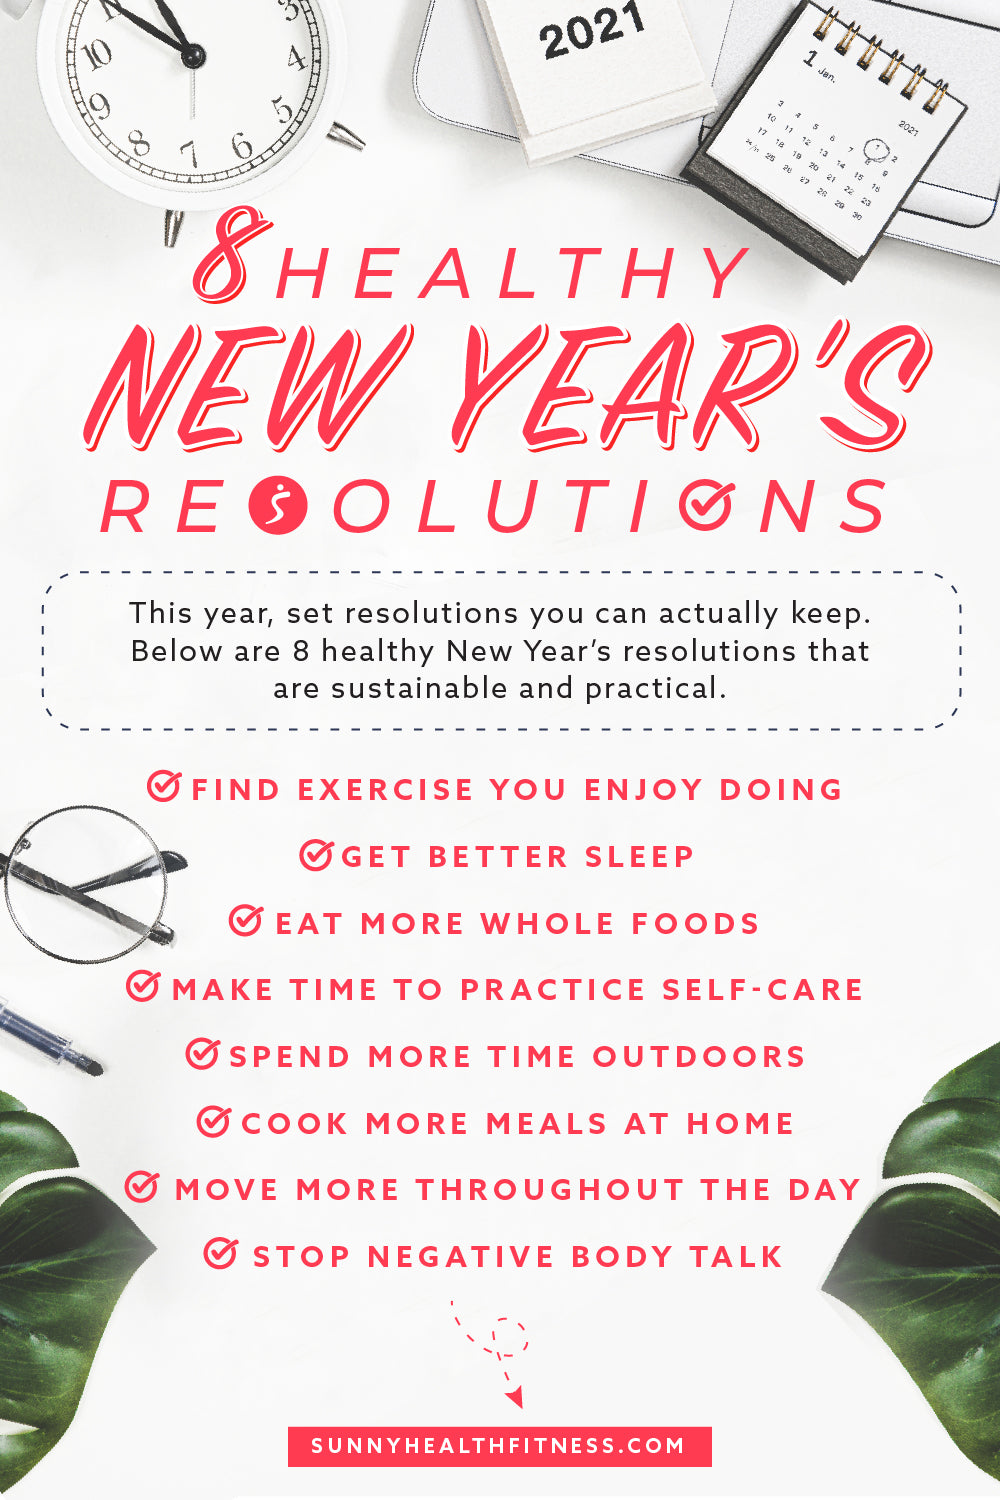 8 Healthy New Year's Resolutions Infographic